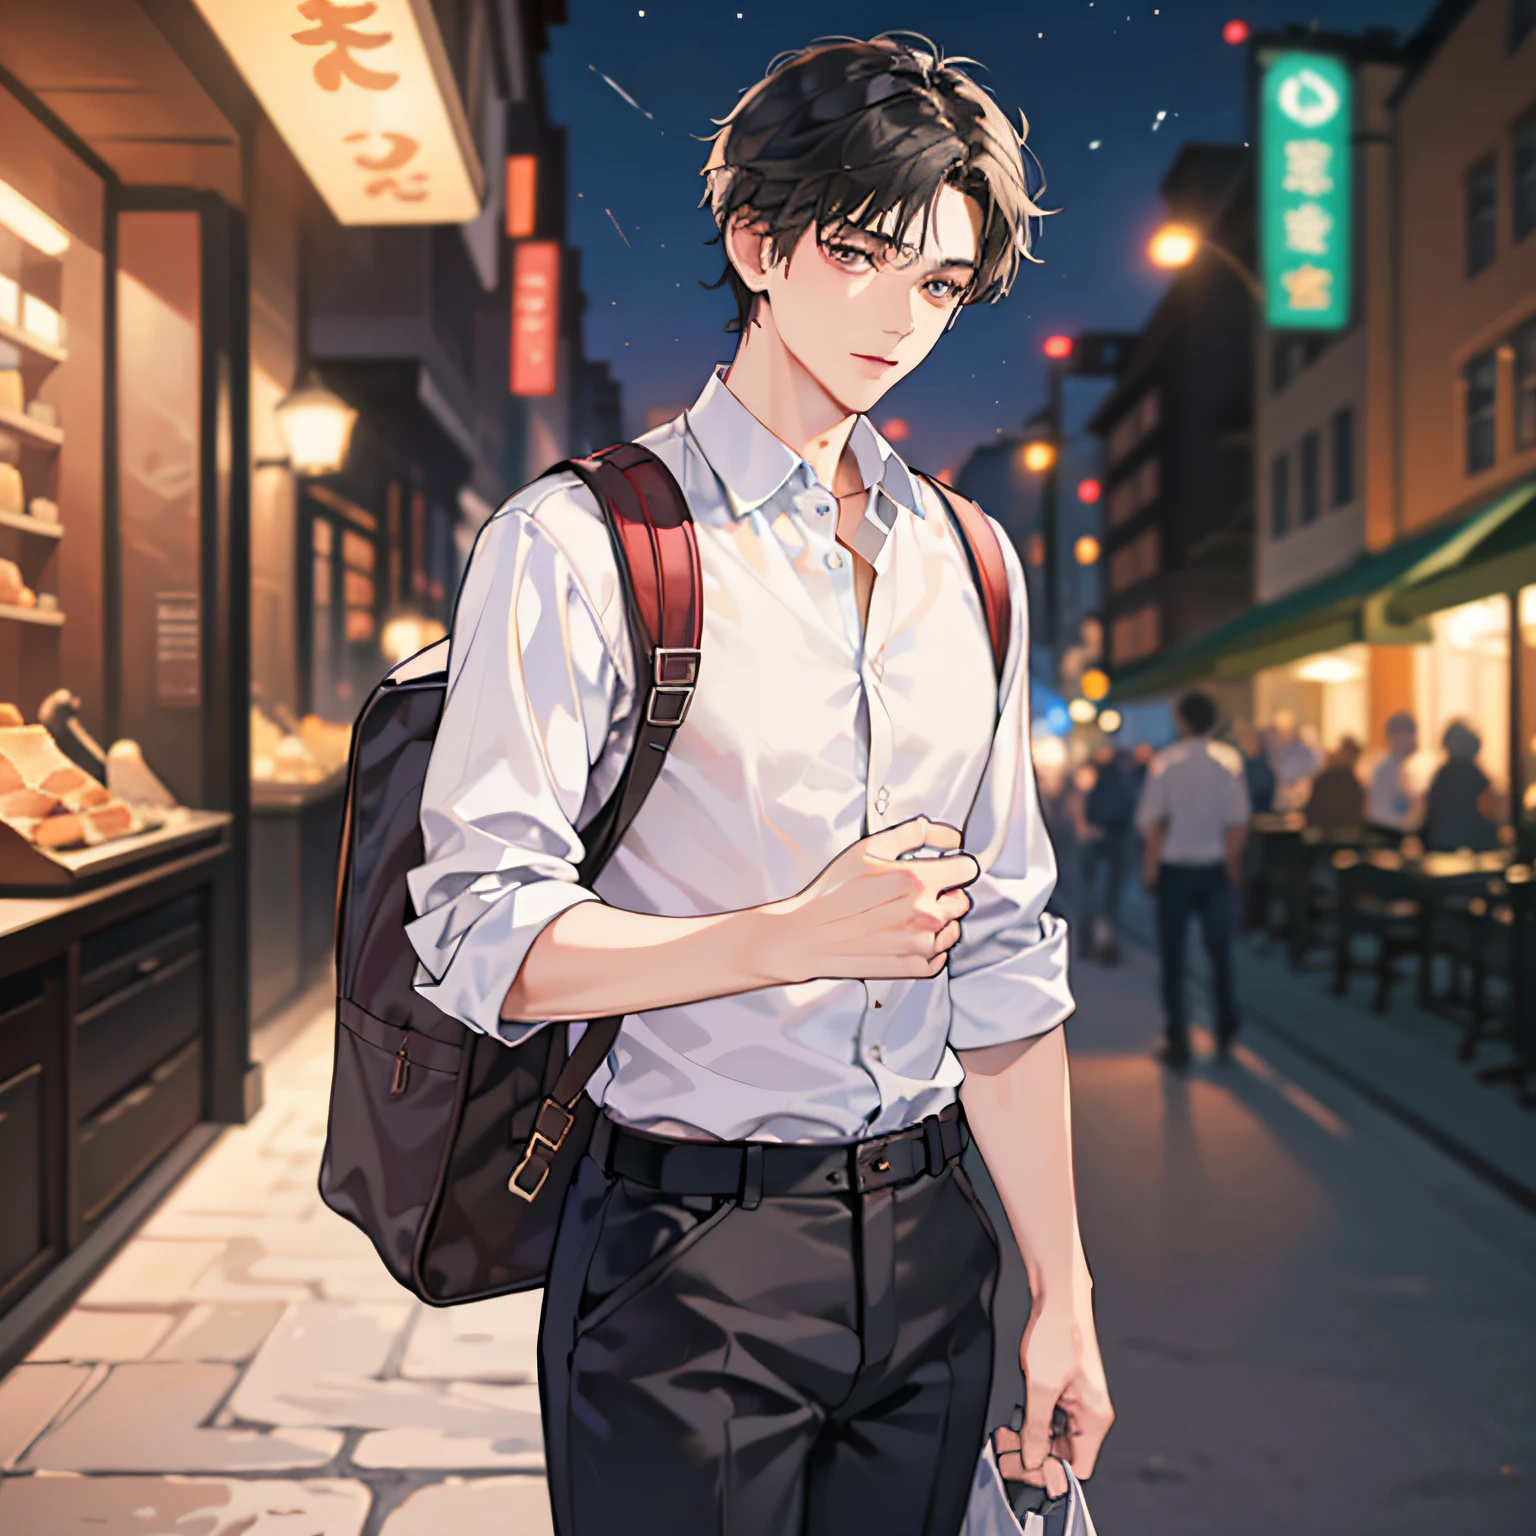 (Handsome man: 1.4), wearing a white shirt, short black hair, delicate face, fair skin, backpack (at night in front of the barbecue restaurant: 1.4), 8K HD, deserted no one, master masterpiece - high-quality image, exquisite (full body: 1.4)